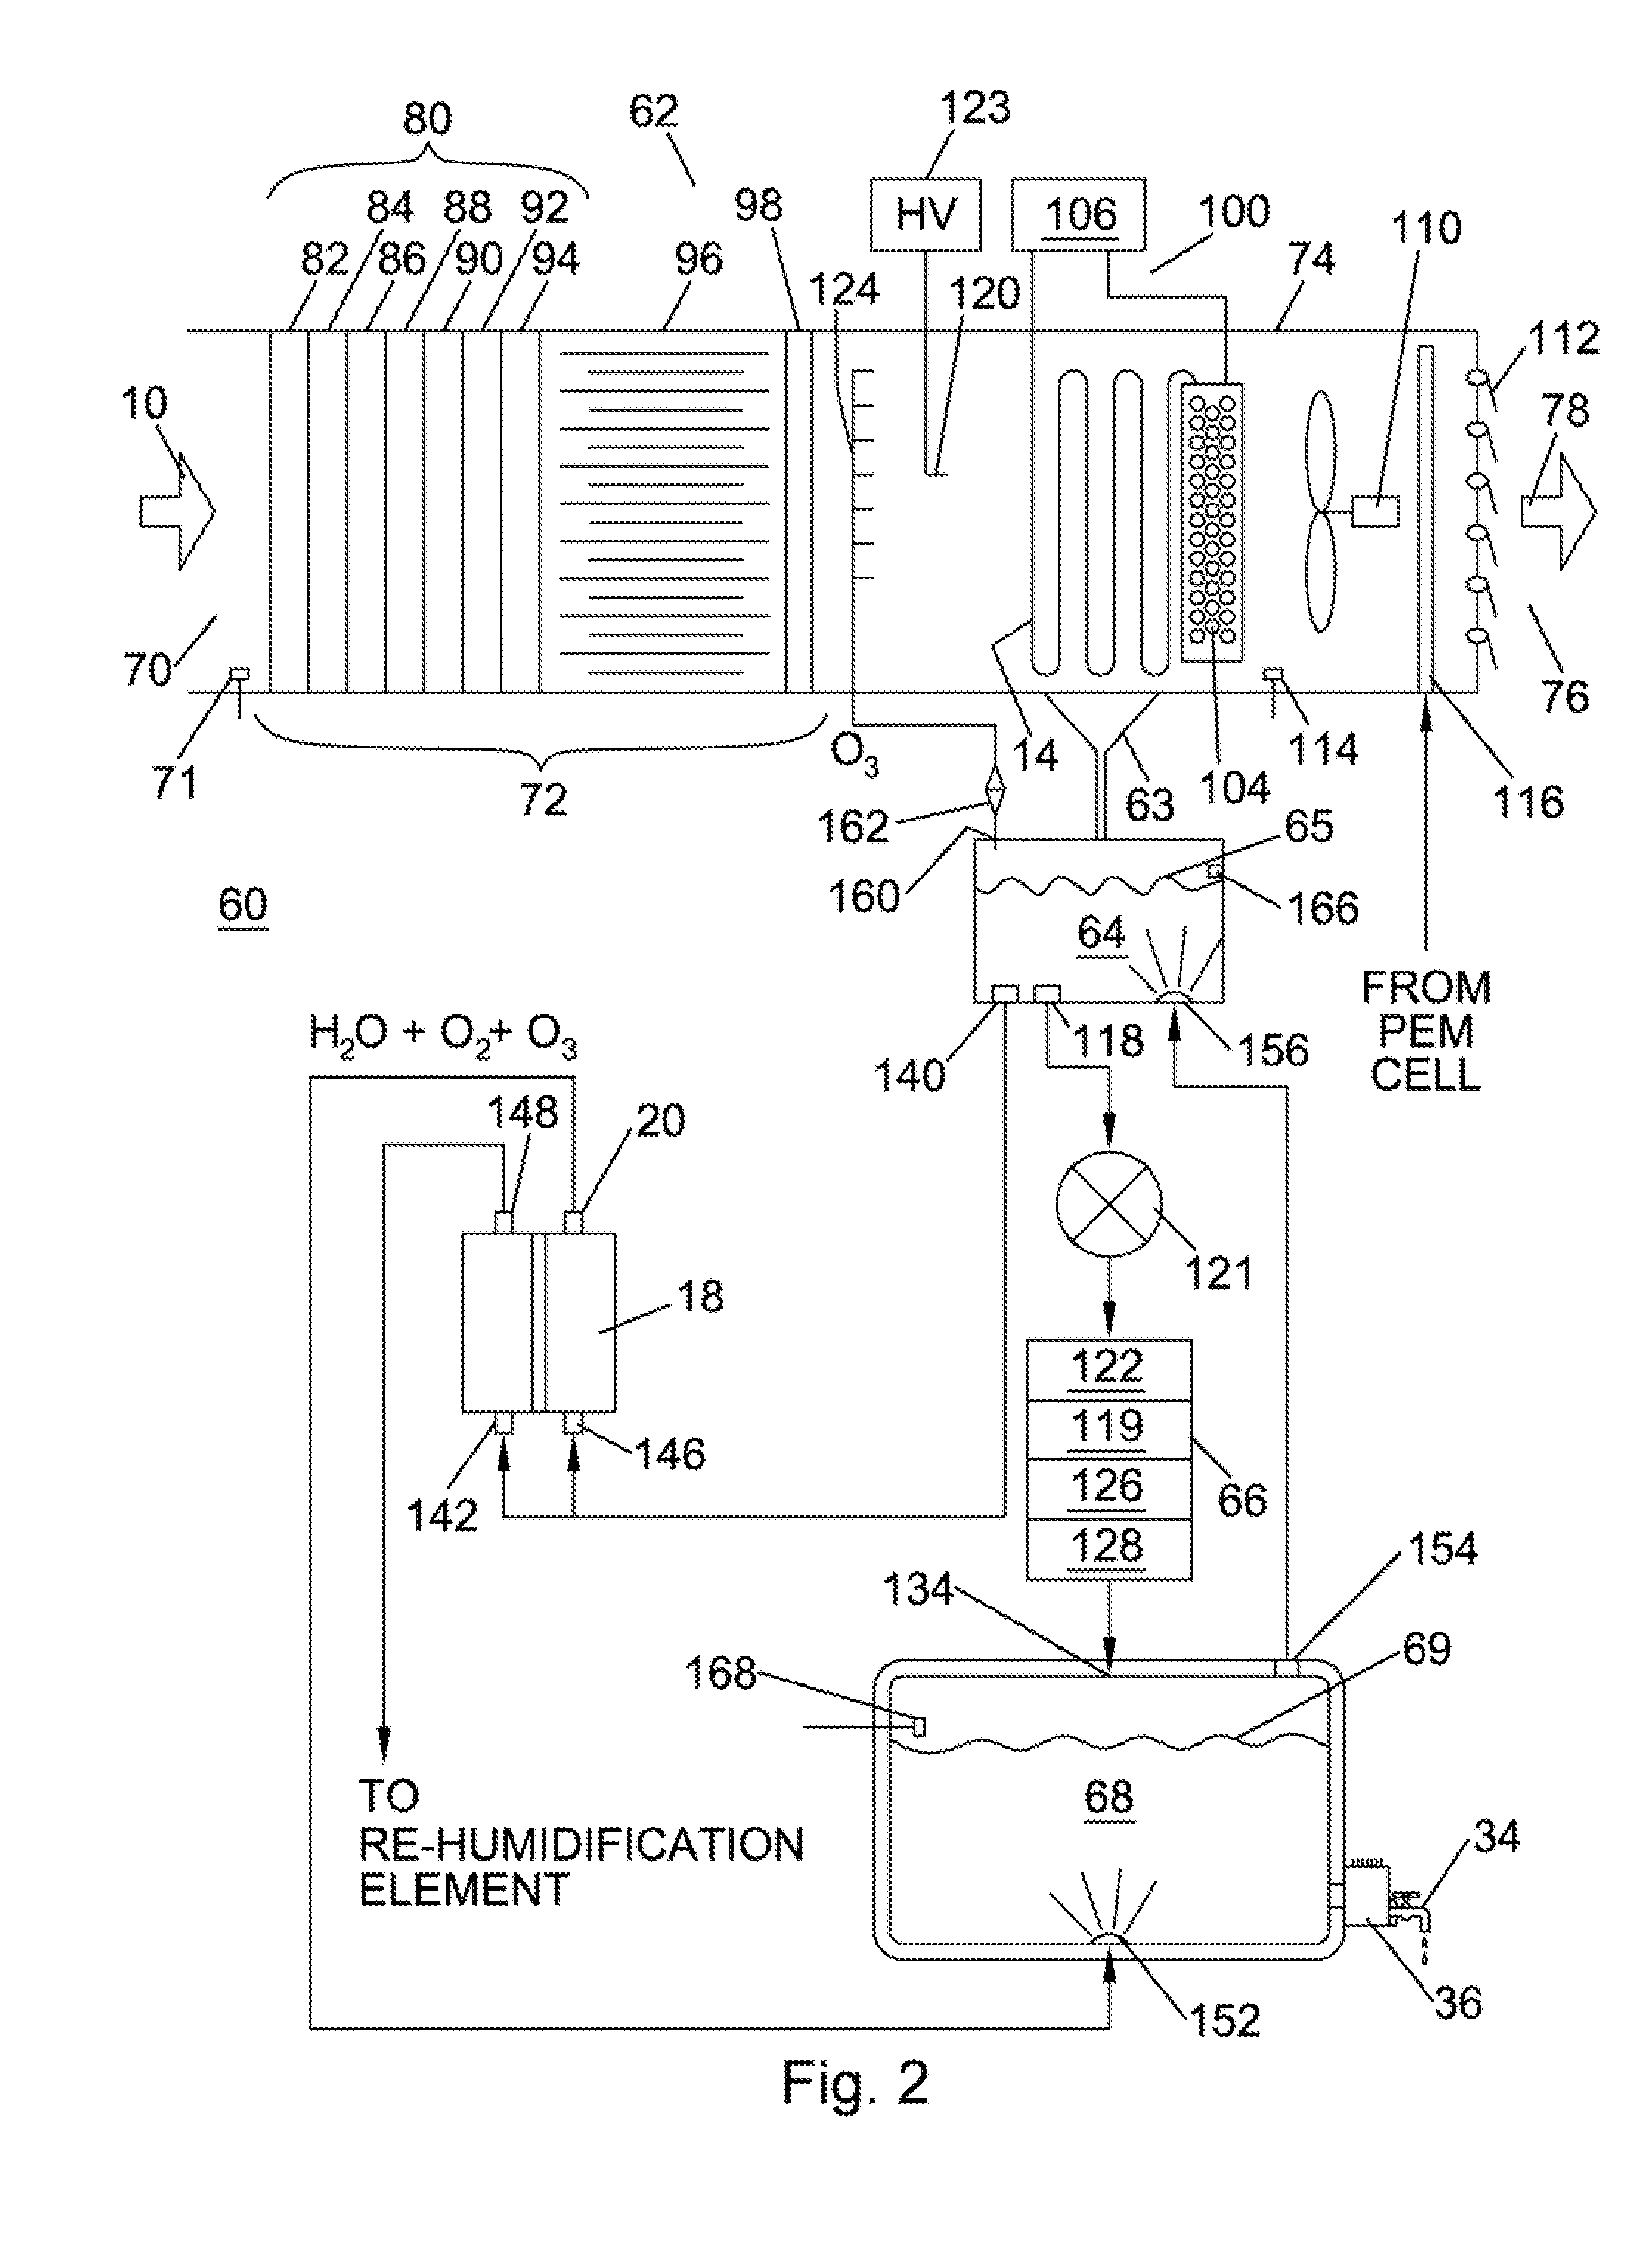 Apparatus and Method For Generating Water From an Air Stream